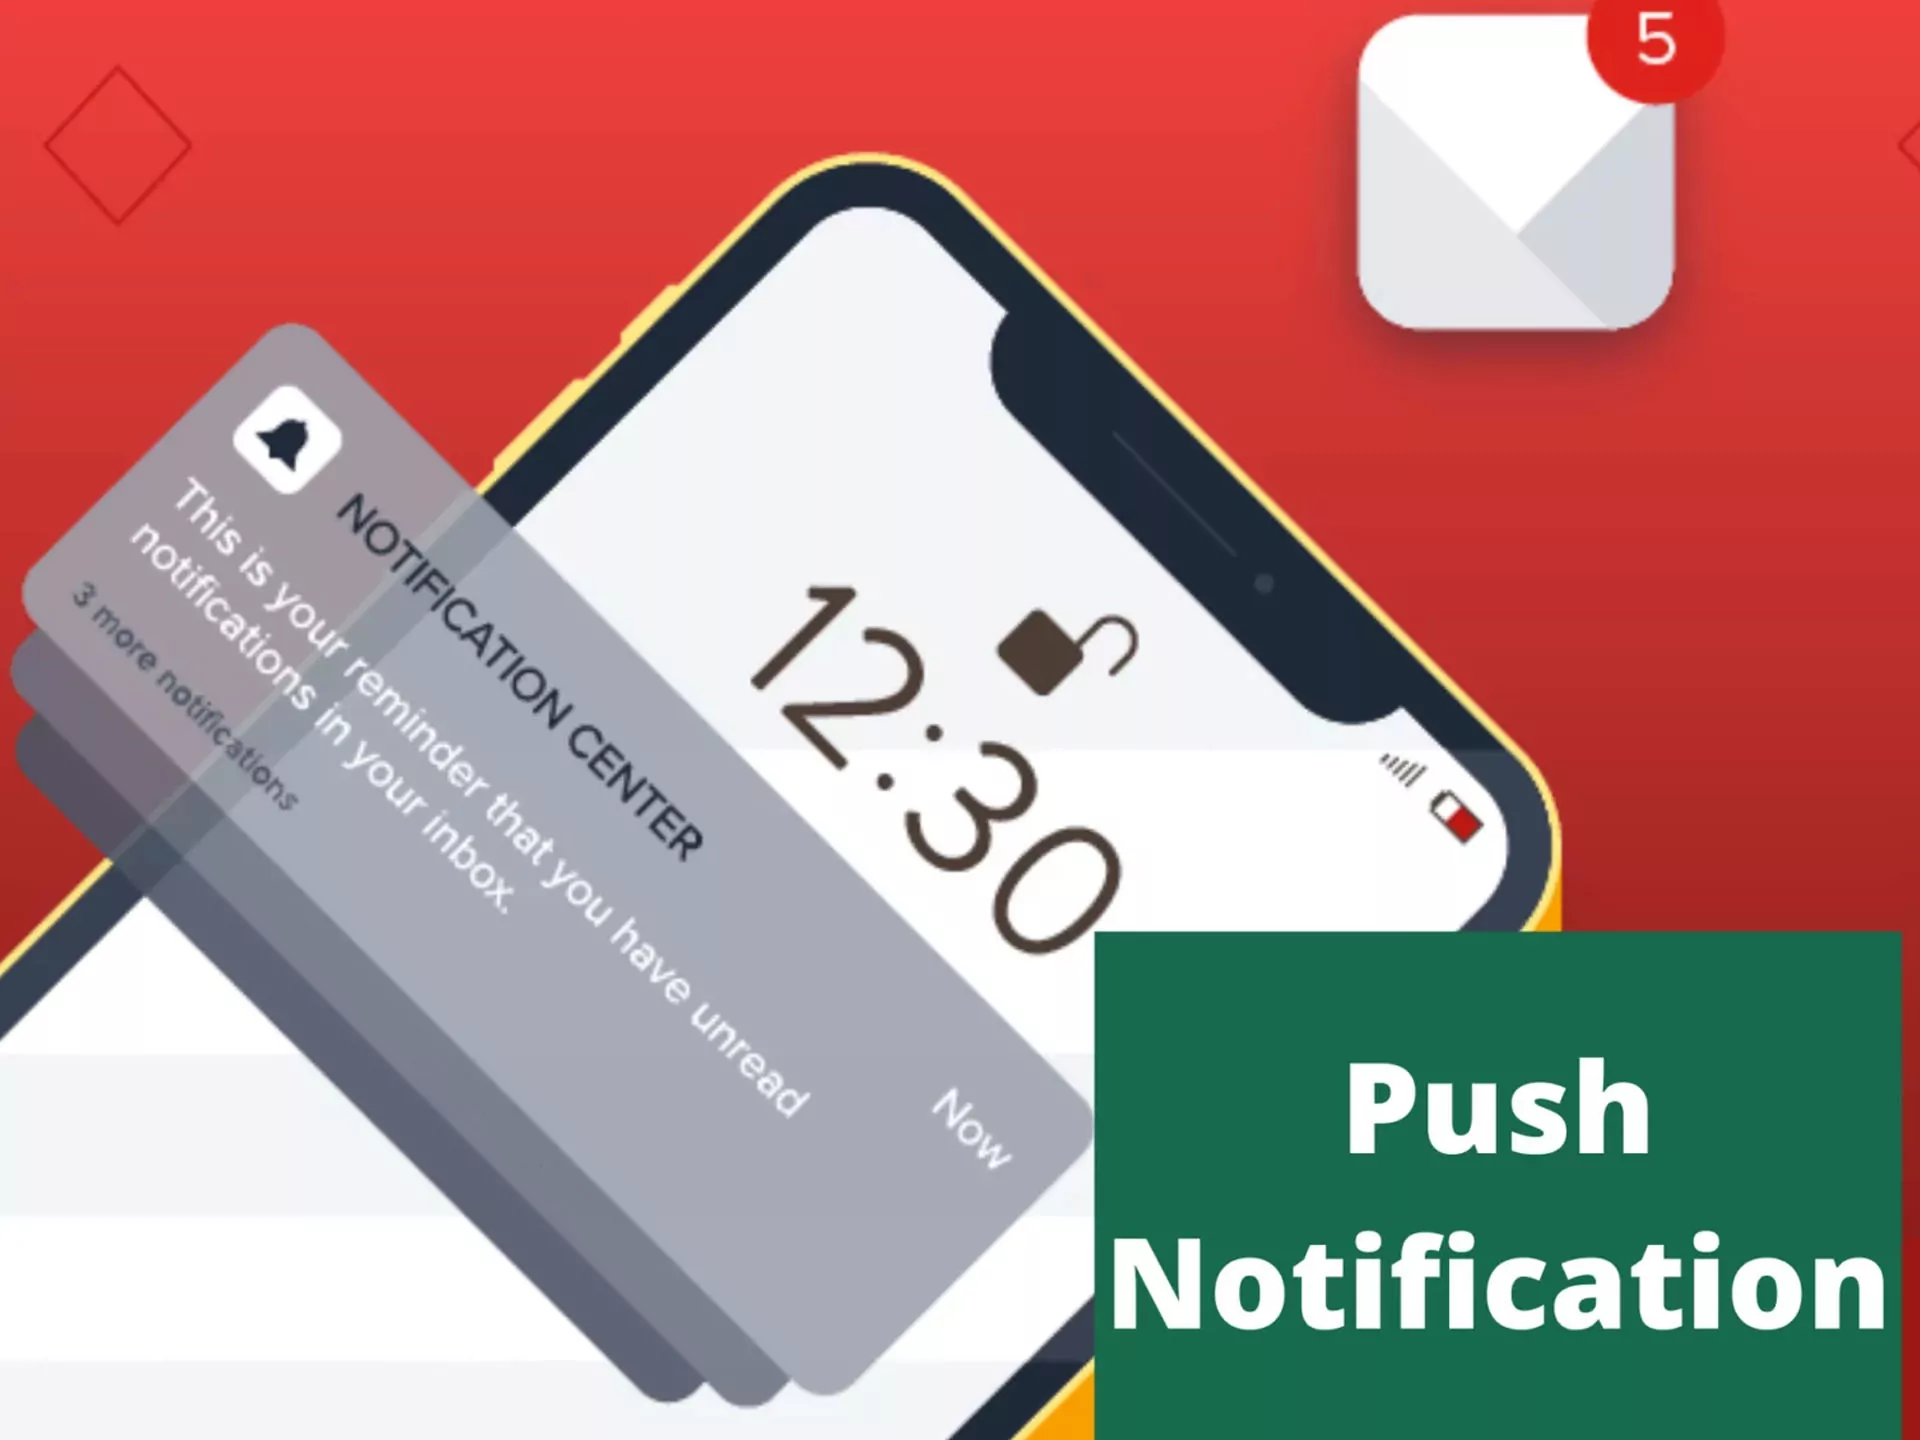 Push notification is very useful feature of Parimatch betting application.